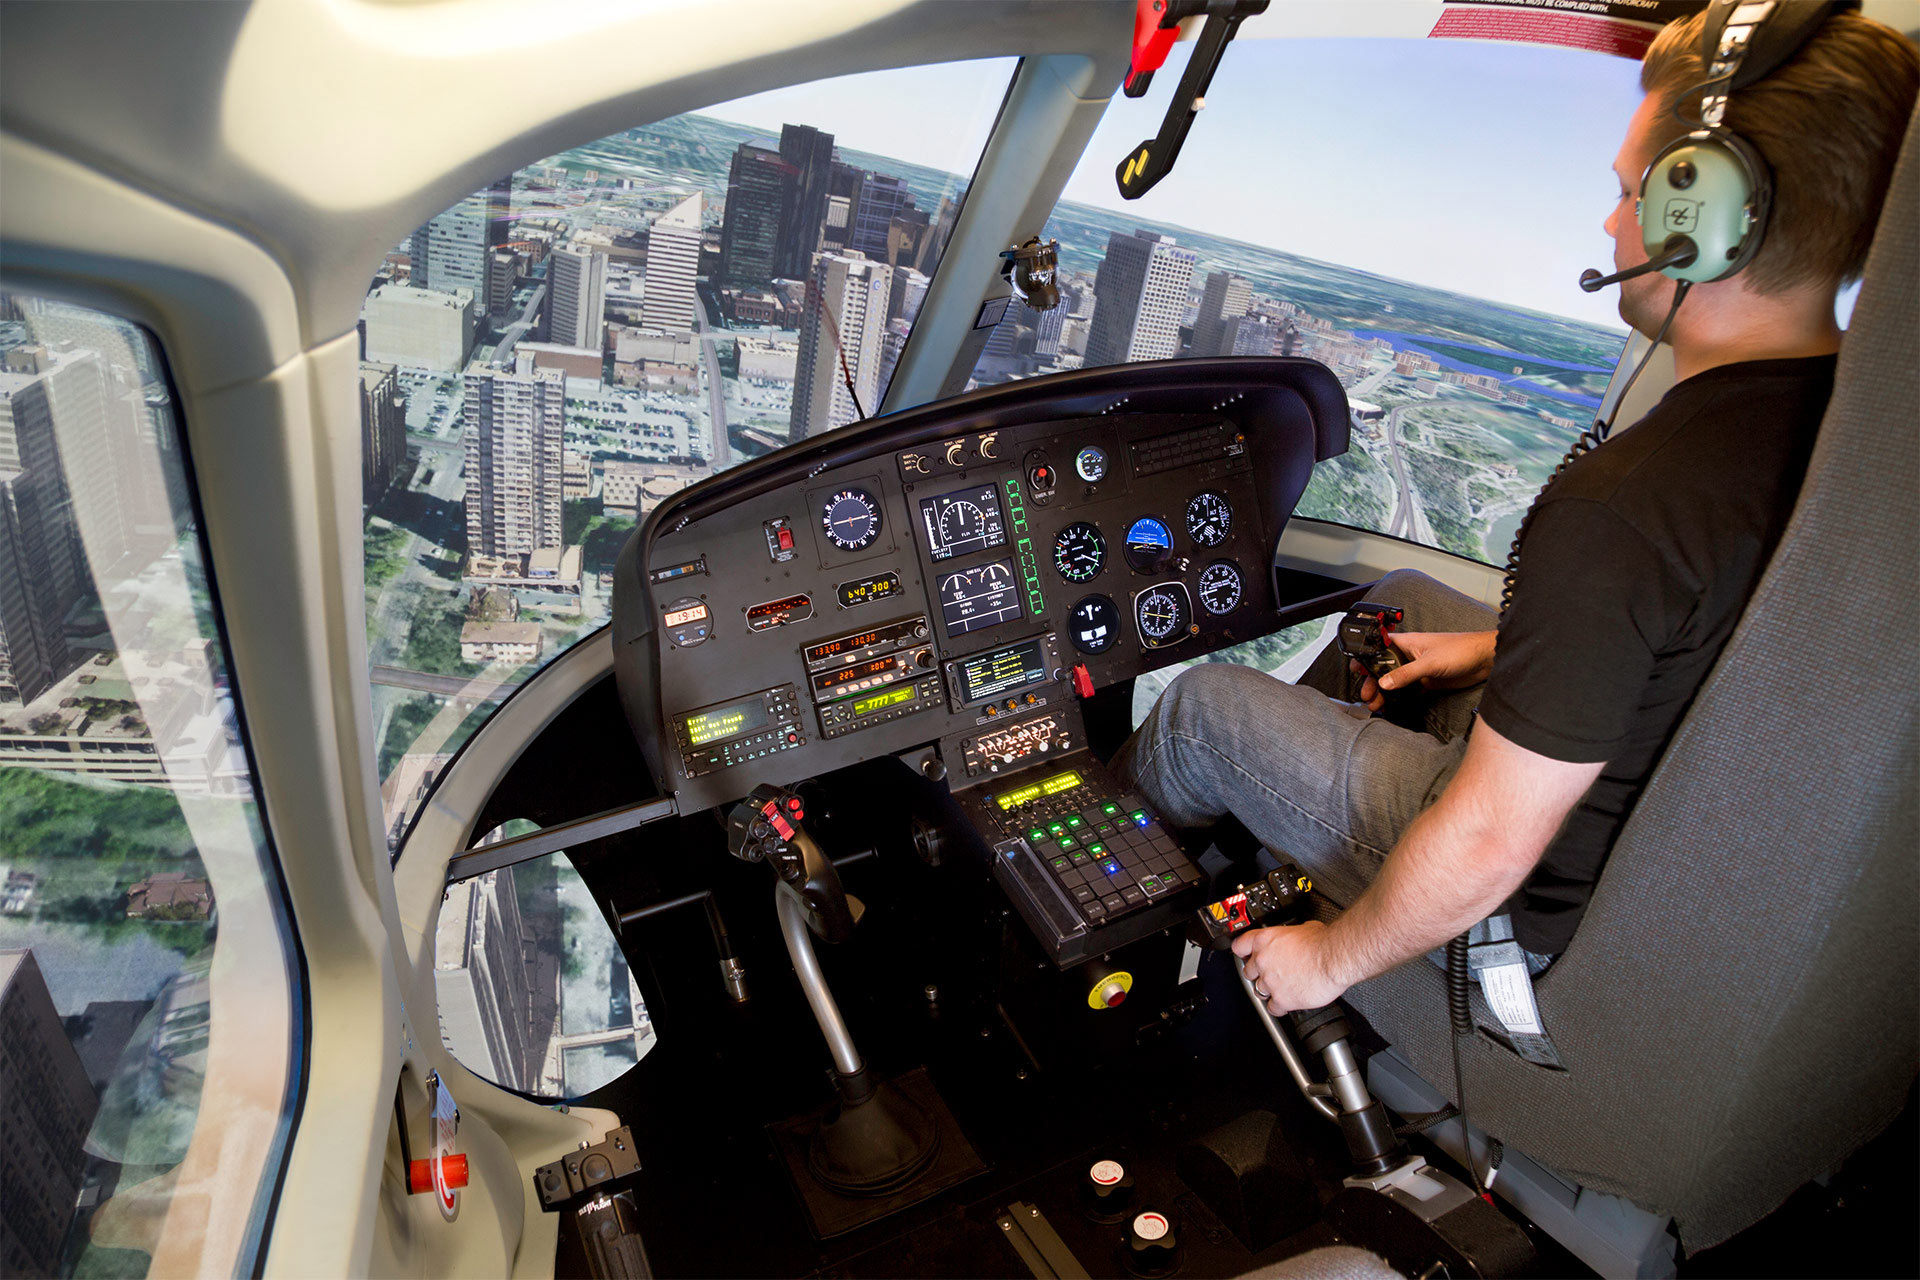 The best helicopter simulator •